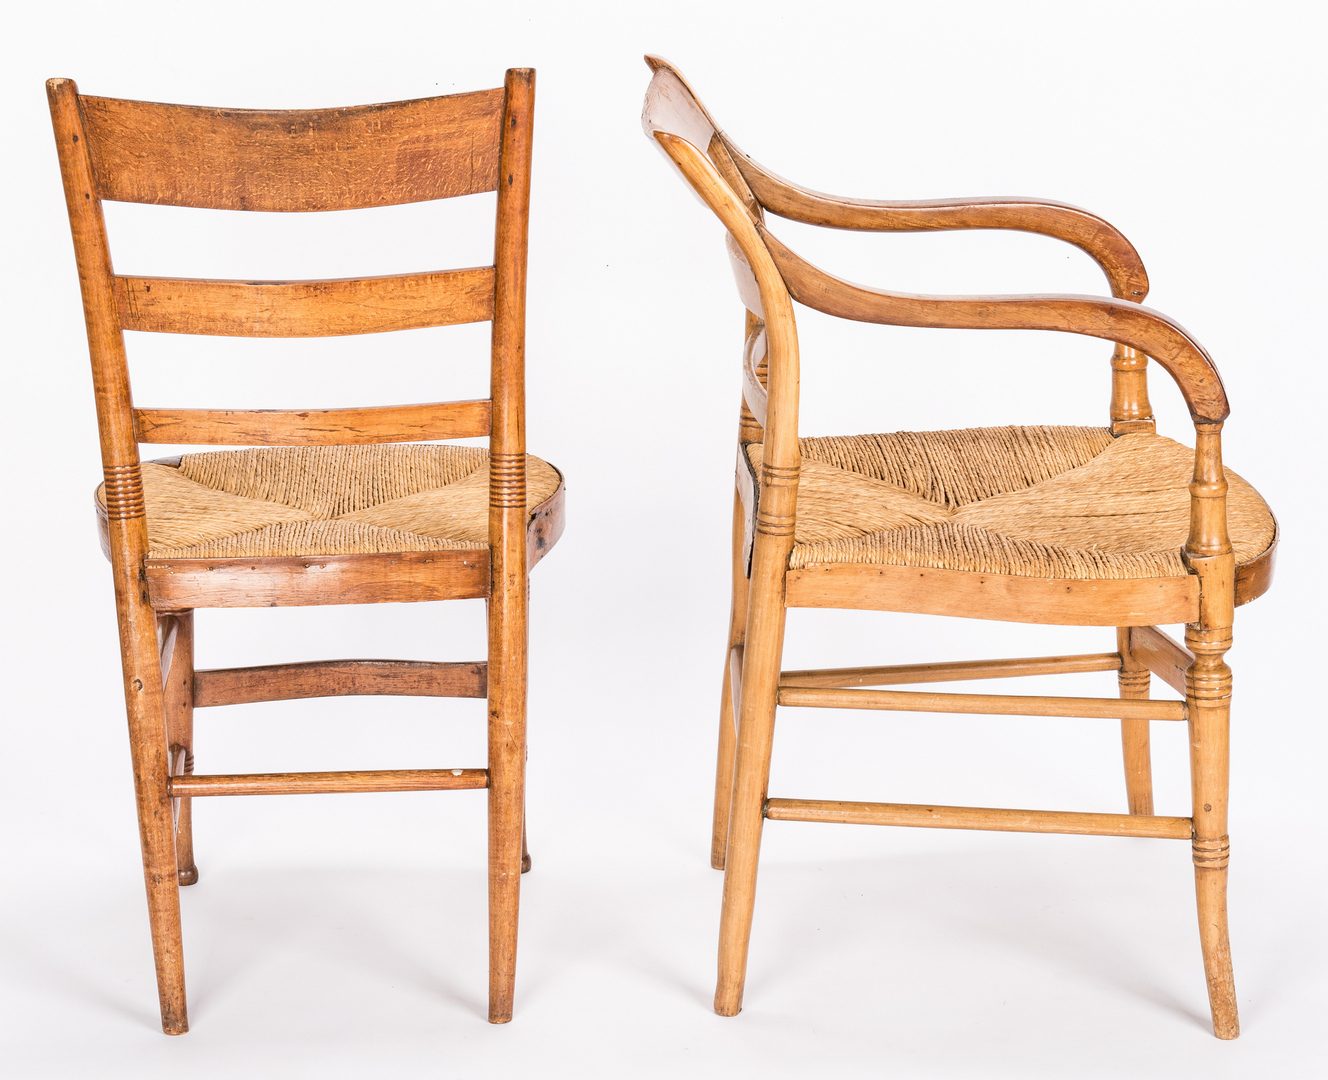 Lot 124: 5 Late Sheraton Southern Tiger Maple Chairs